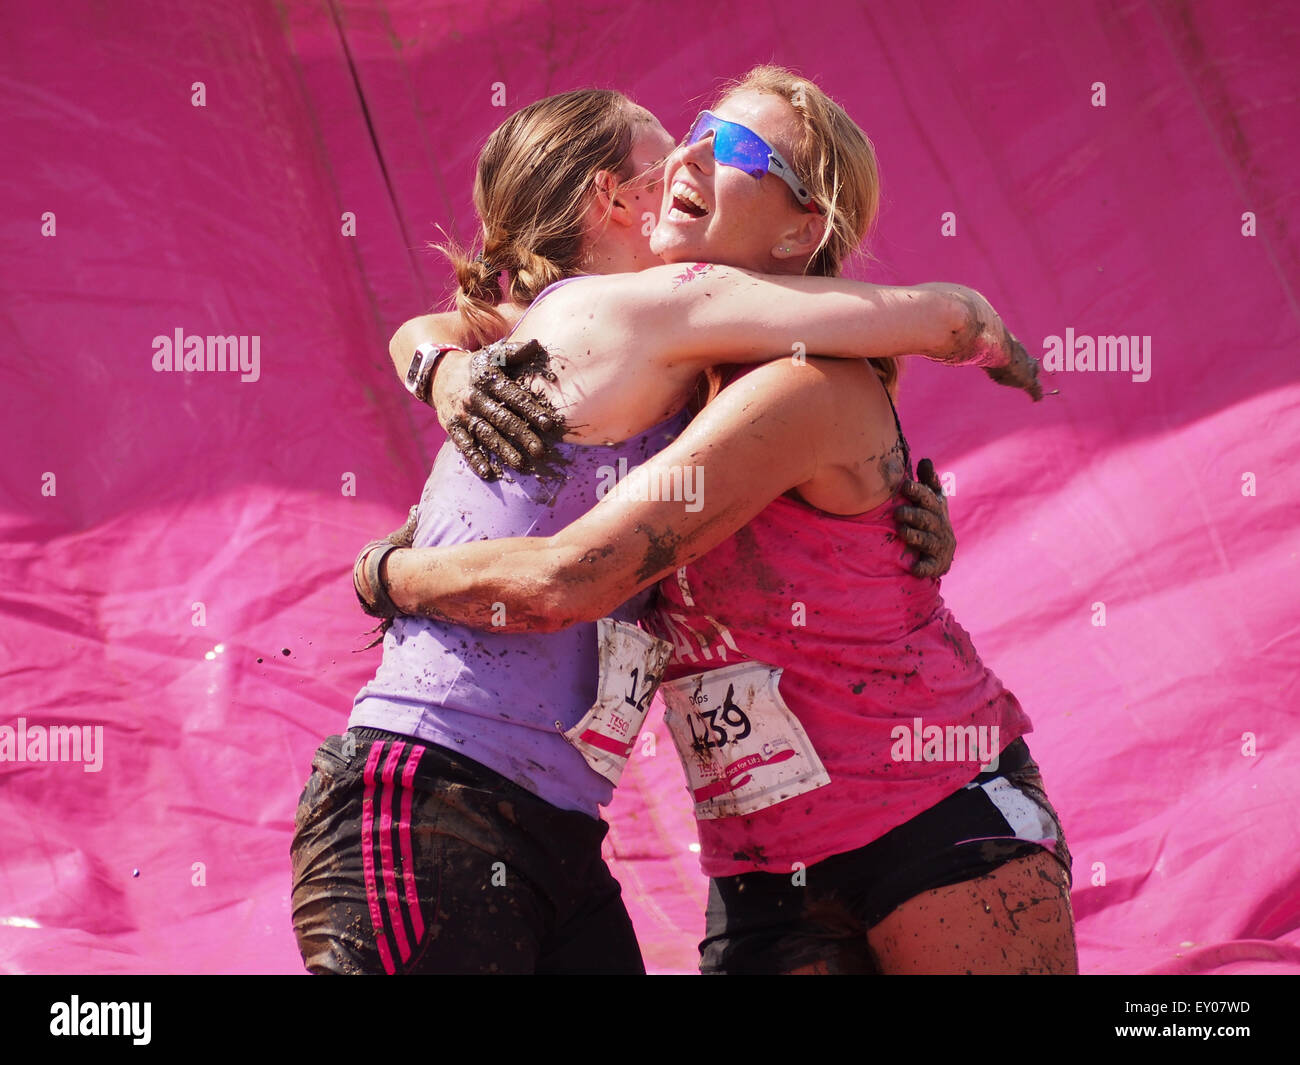 Portsmouth, UK. 18th July, 2015. Two  participants in the Race For Life - Pretty muddy hug each other at the end of the final obstacle of the race. The Race for Life Pretty Muddy event is open to females only and consists of a 5K mud covered obstacle course Credit:  simon evans/Alamy Live News Stock Photo